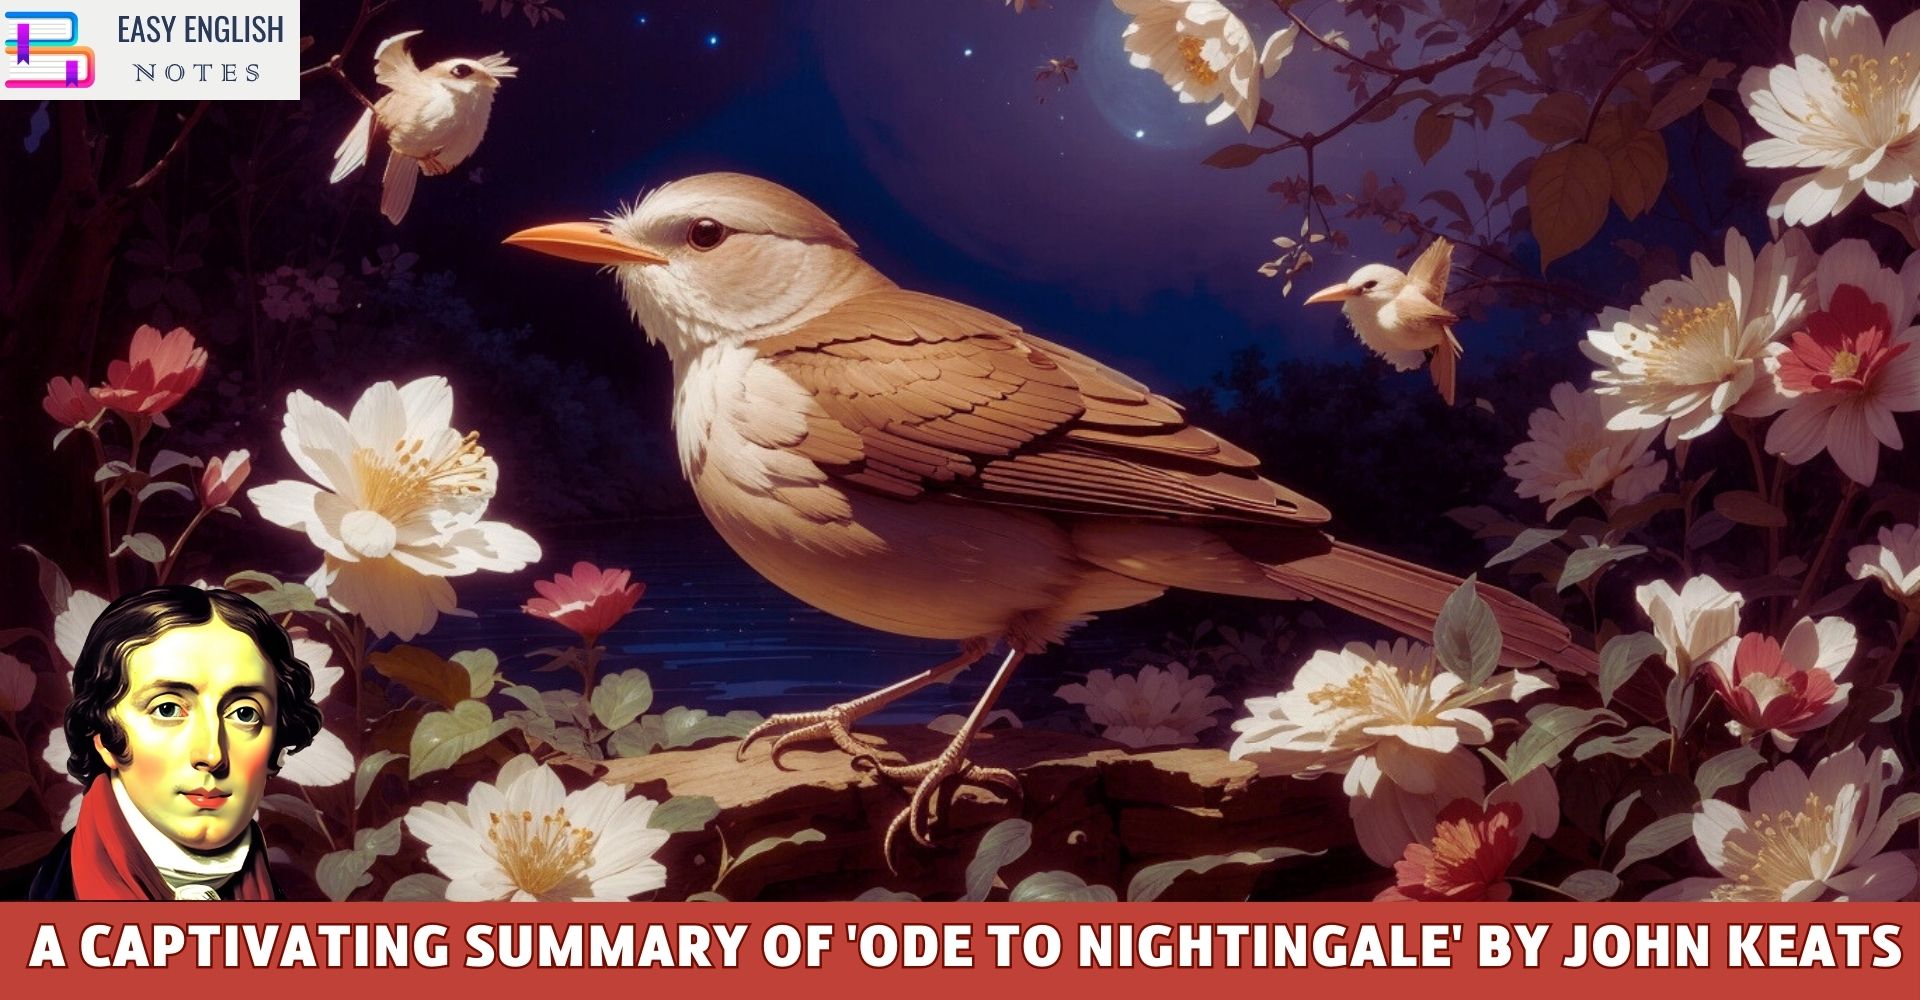 A Captivating Summary of 'Ode To Nightingale' by John Keats